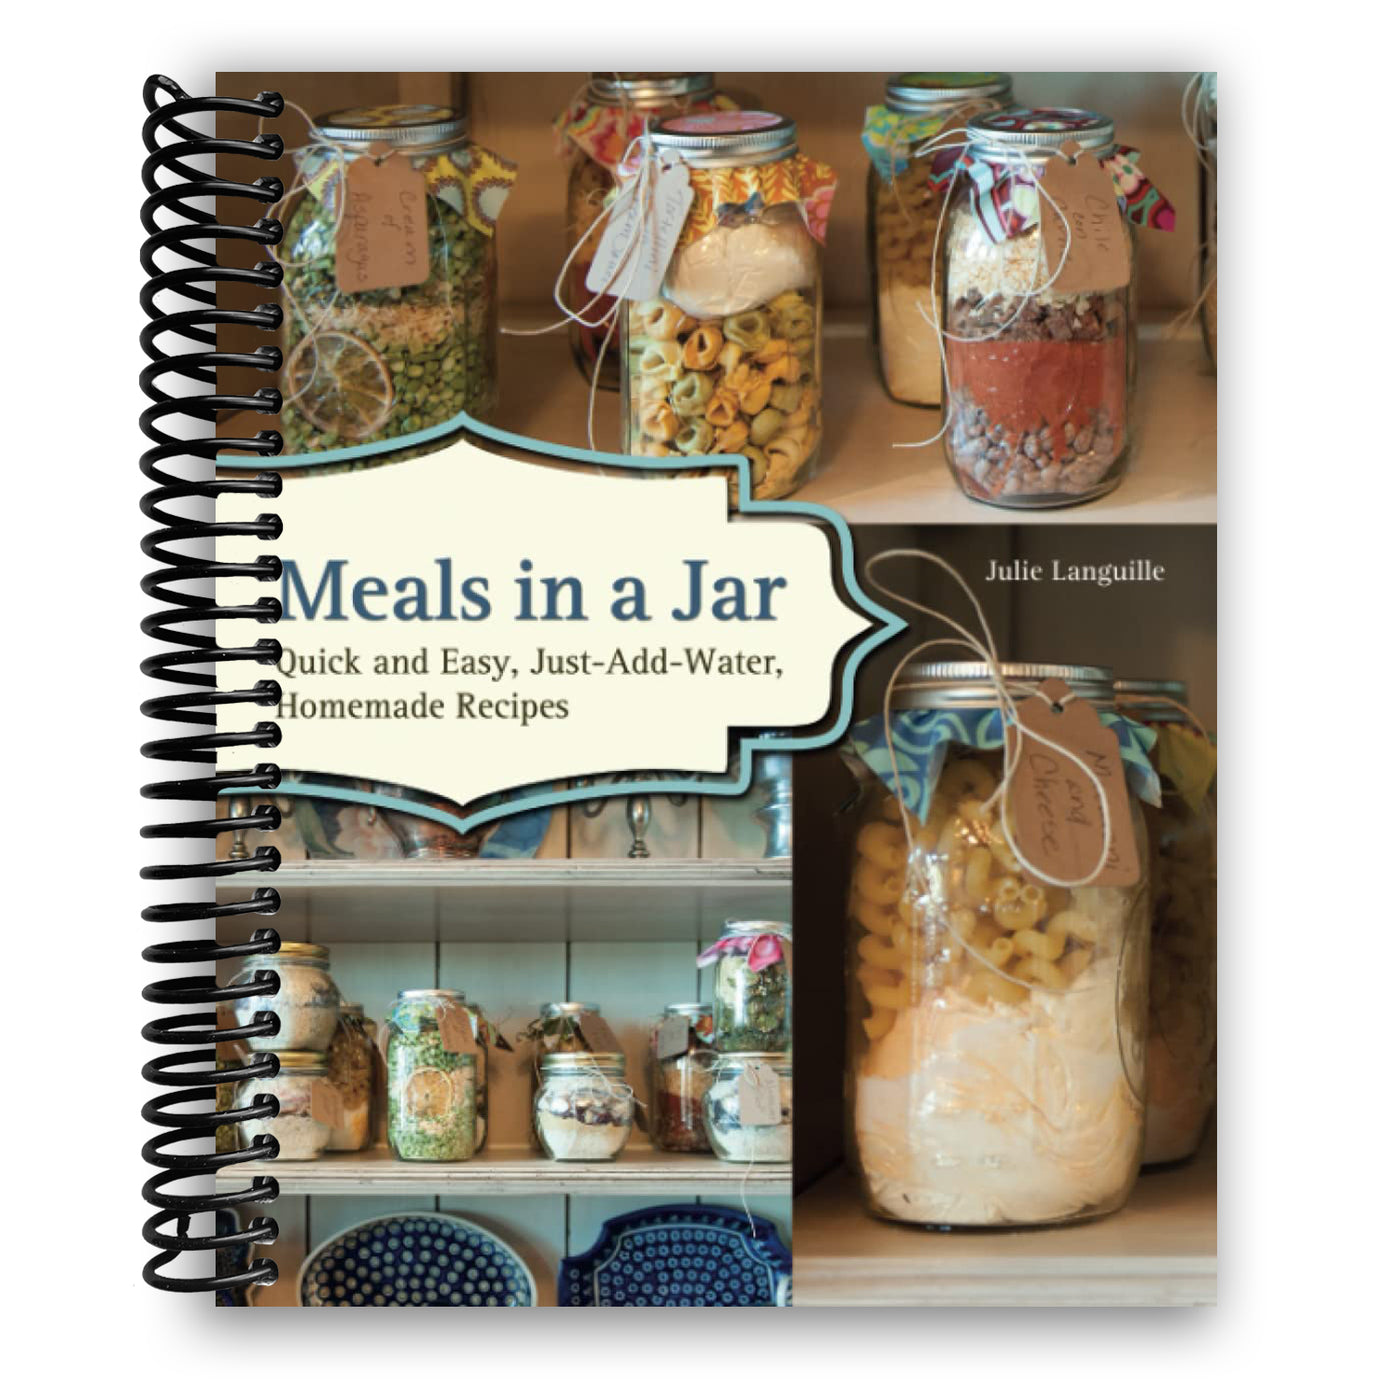 Meals in a Jar: Quick and Easy, Just-Add-Water, Homemade Recipes (Spiral Bound)